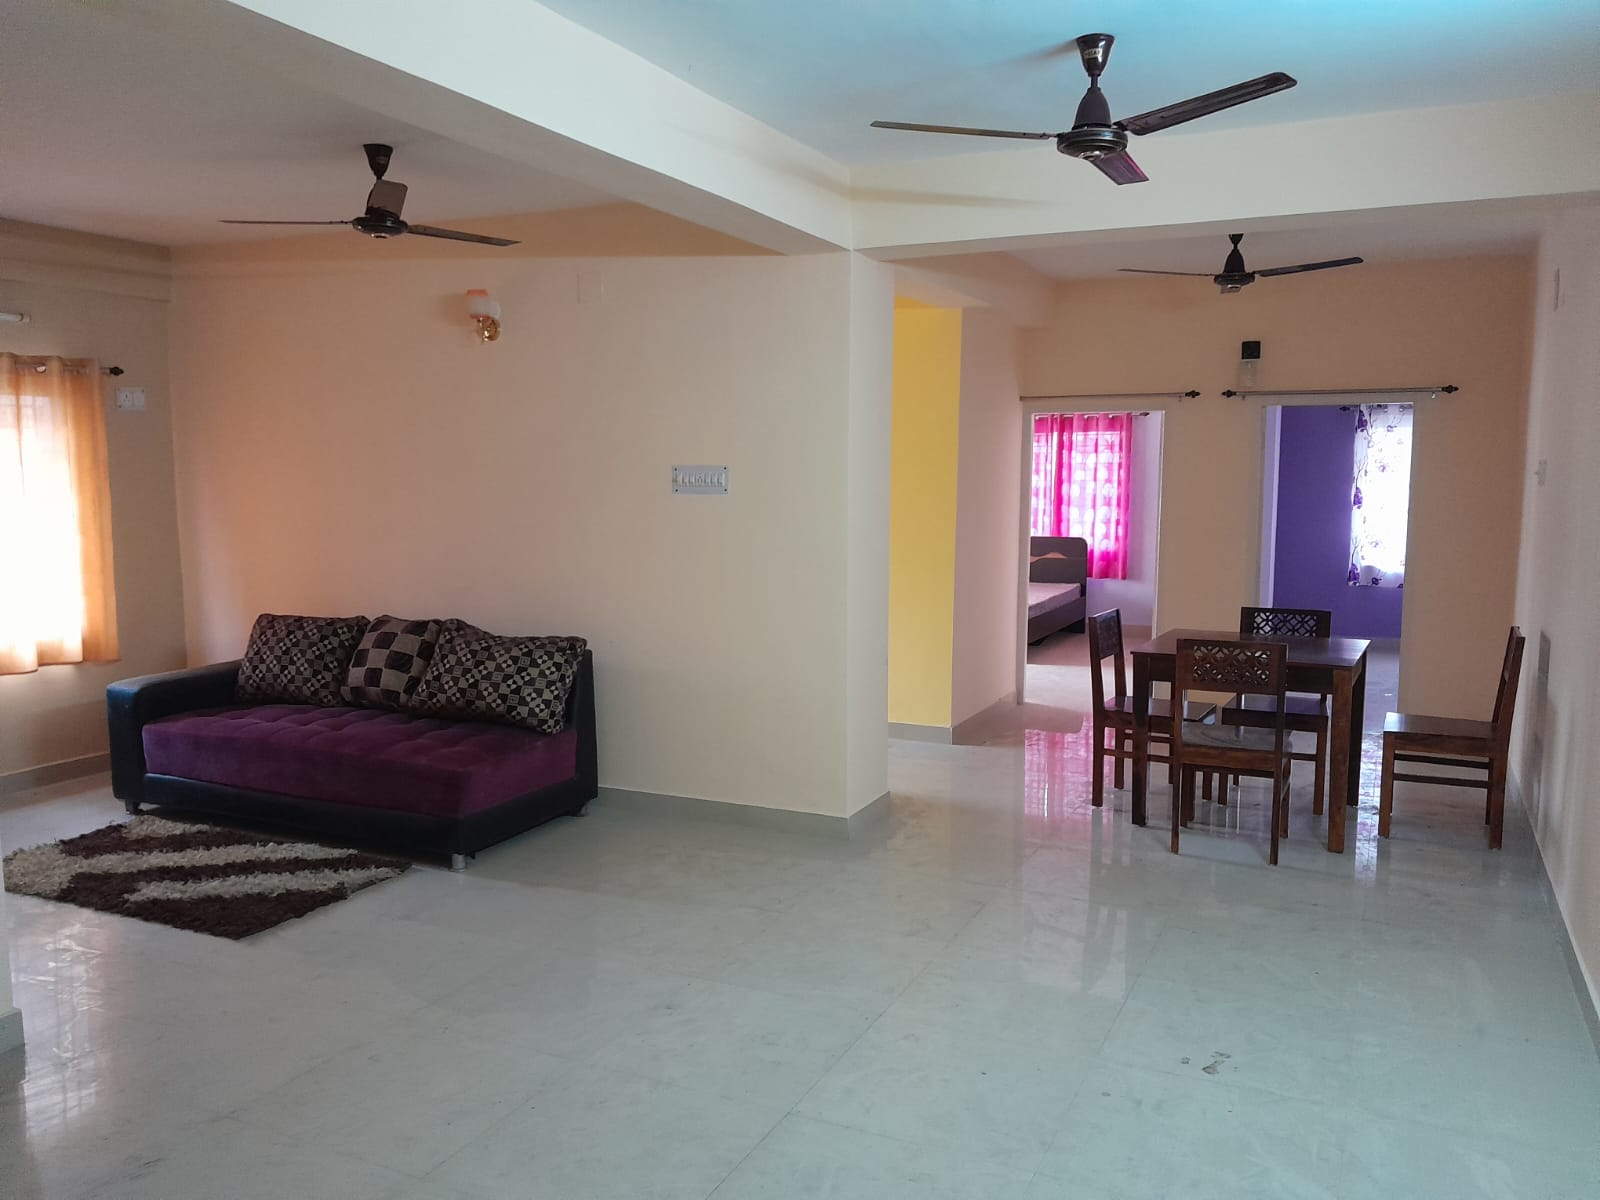 3-bhk-flat-for-rent1698491129